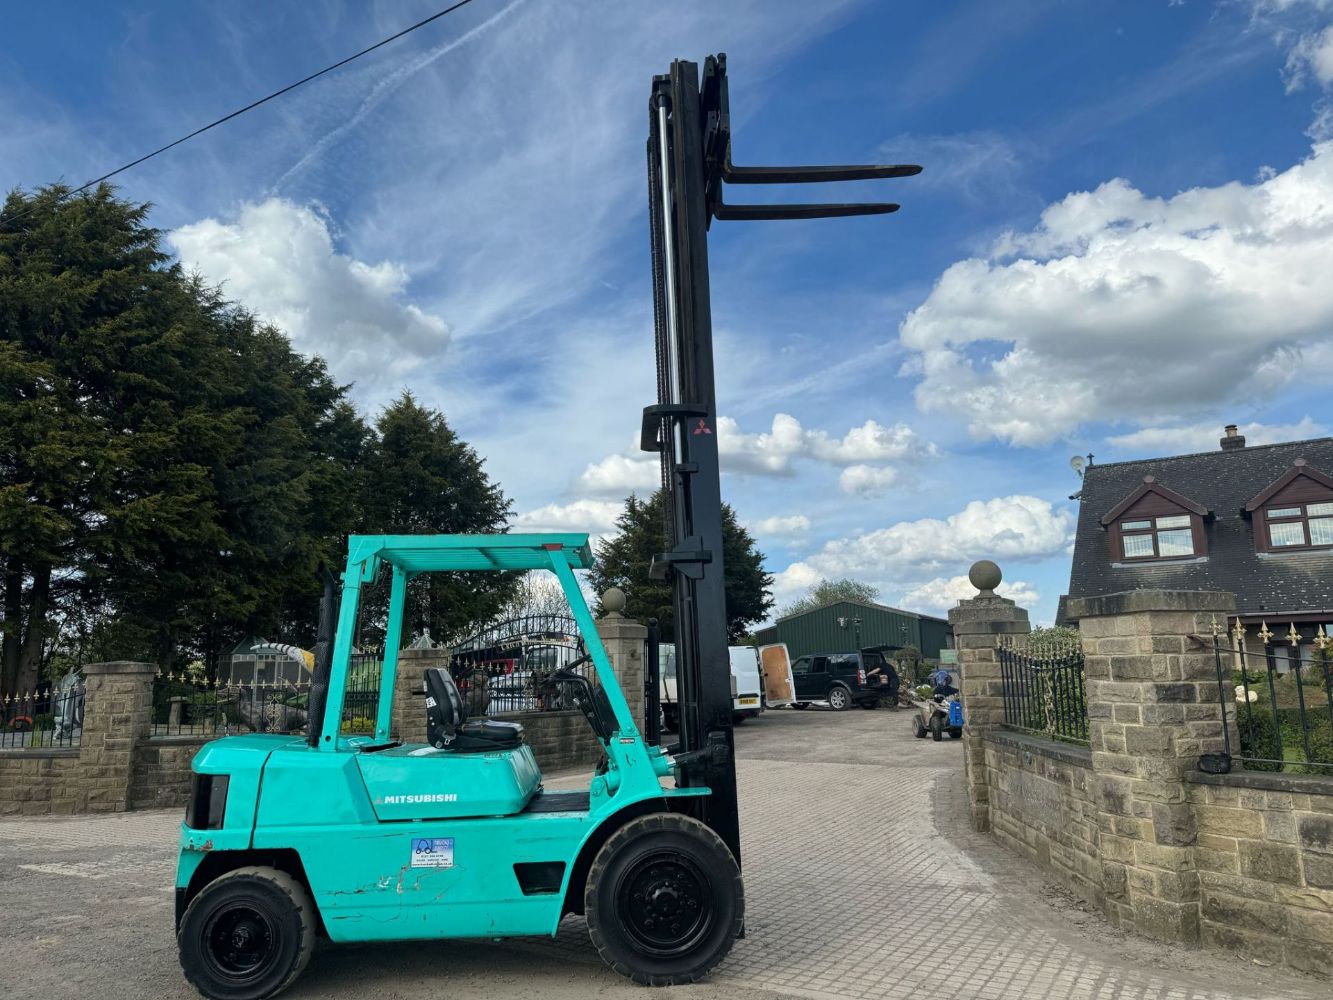 Friday 12PM, MITSUBISHI 4 TON DIESEL FORKLIFT. FIAT WORKSHOP VAN, AUDI A5'S, A6'S, A7'S, DIESEL POWERED FORKLIFT, PREMIUM WATCHES + MORE